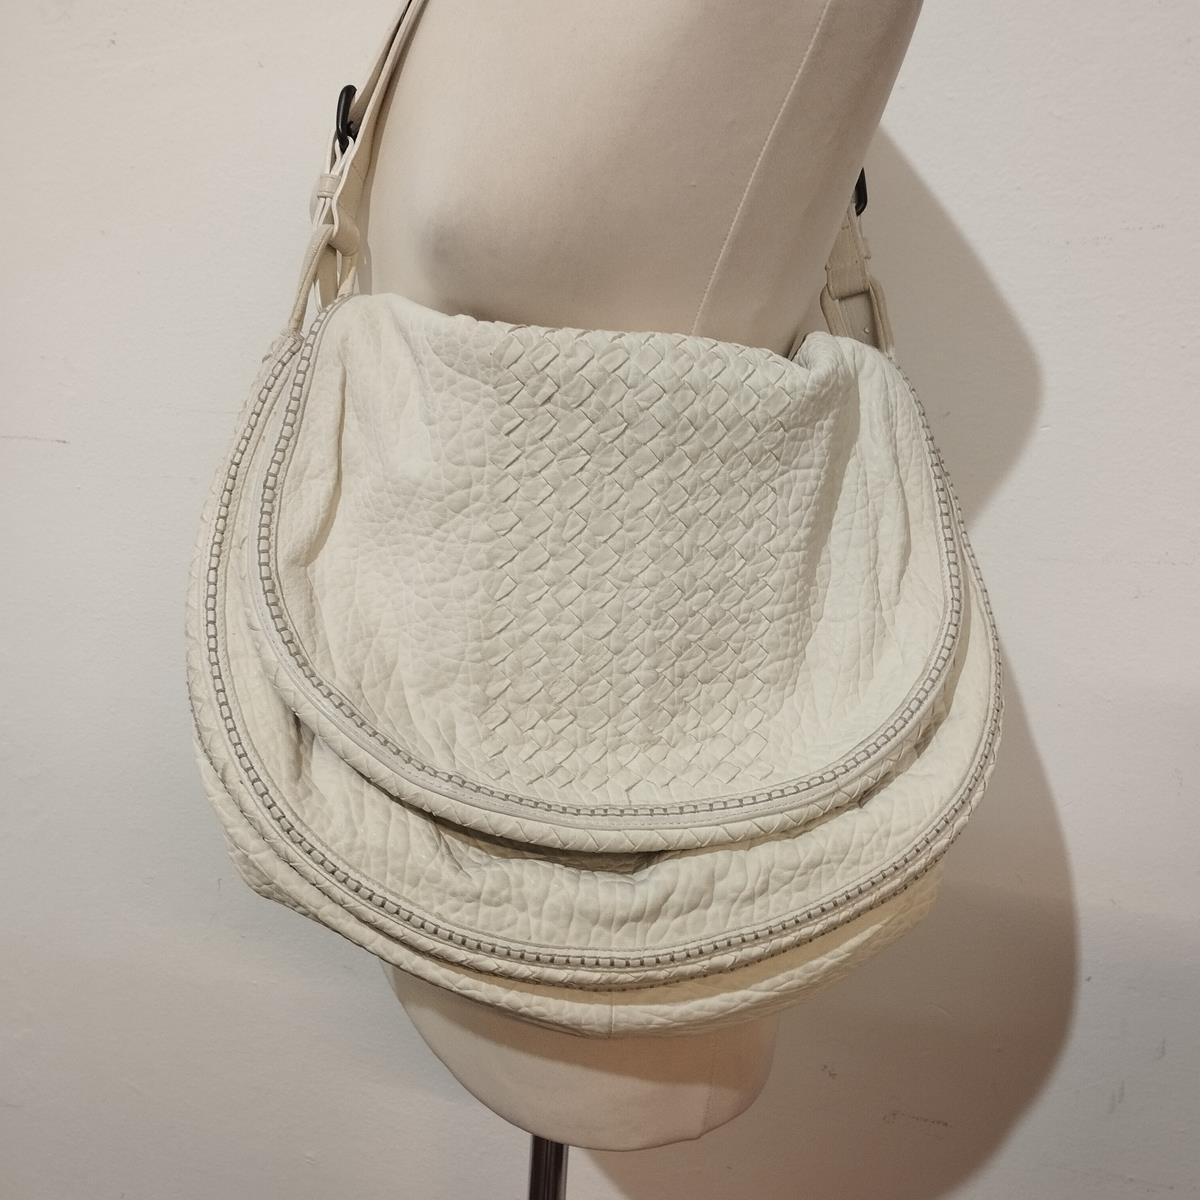 Beautiful  Bottega Veneta bag, Icon and symbol of understated luxury
Intrecciato leather tote
White color
Single handle
Can be carried on shoulder 
Internal zip pocket and phone holder
Grey suede internal
Cm 42 x 32 (16,5 x 12,5 inches) 
With